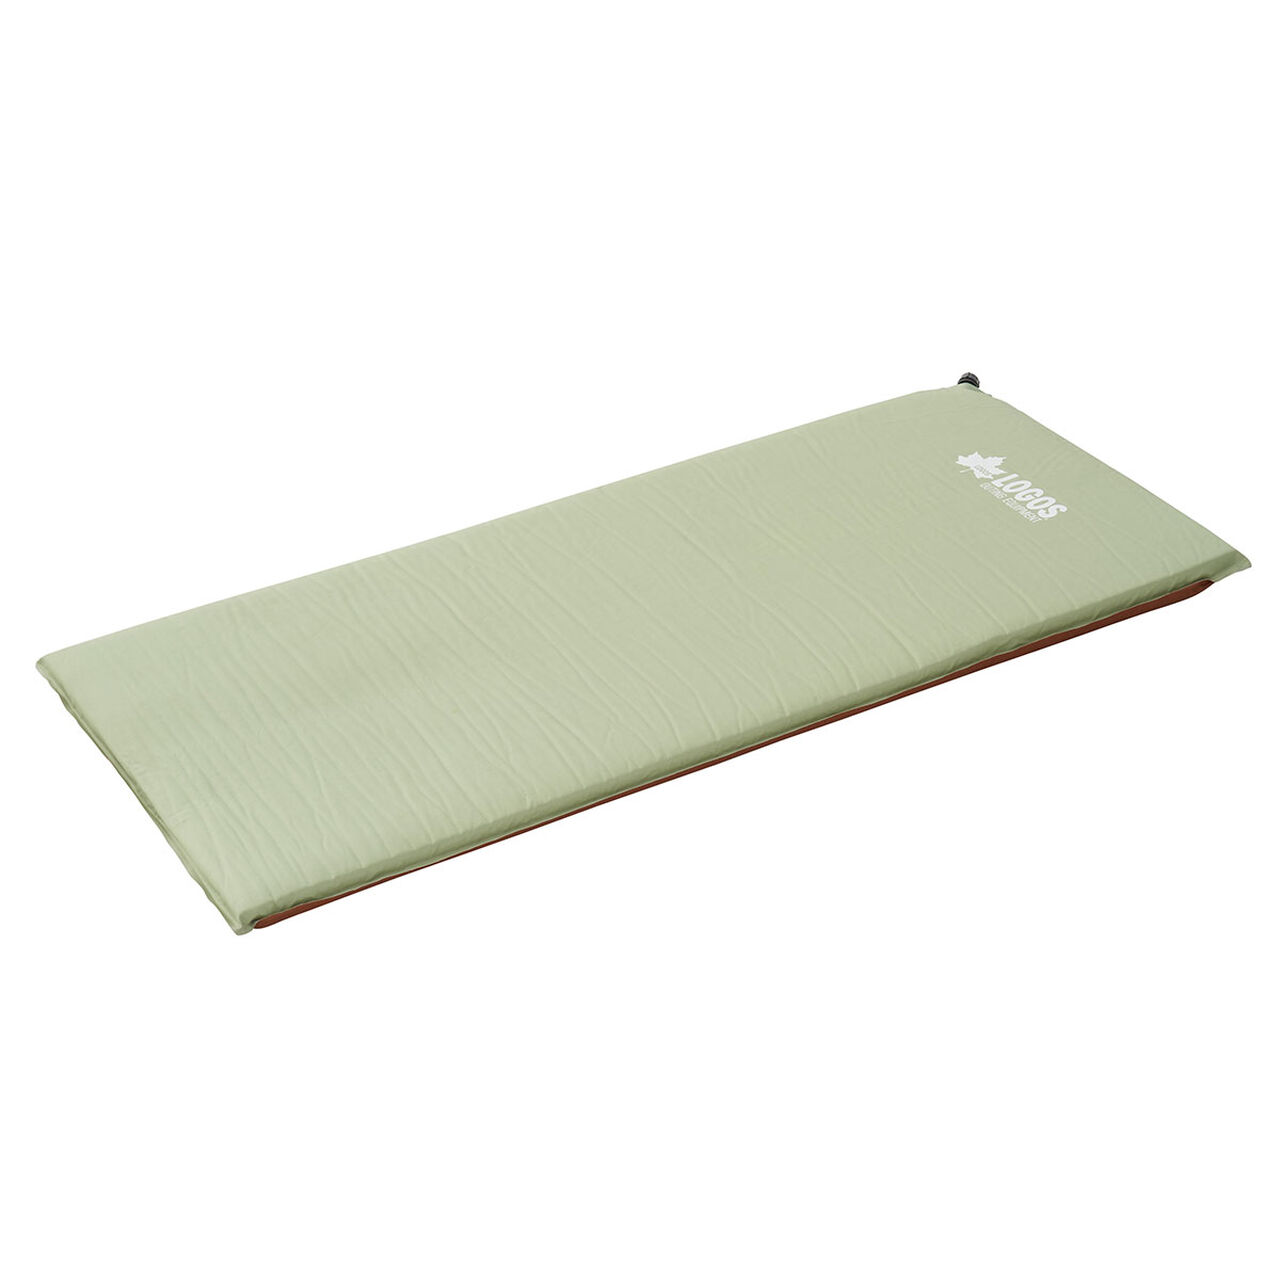 (High Density Foam) 40 Compact Self-inflating Mat - SOLO,, large image number 1